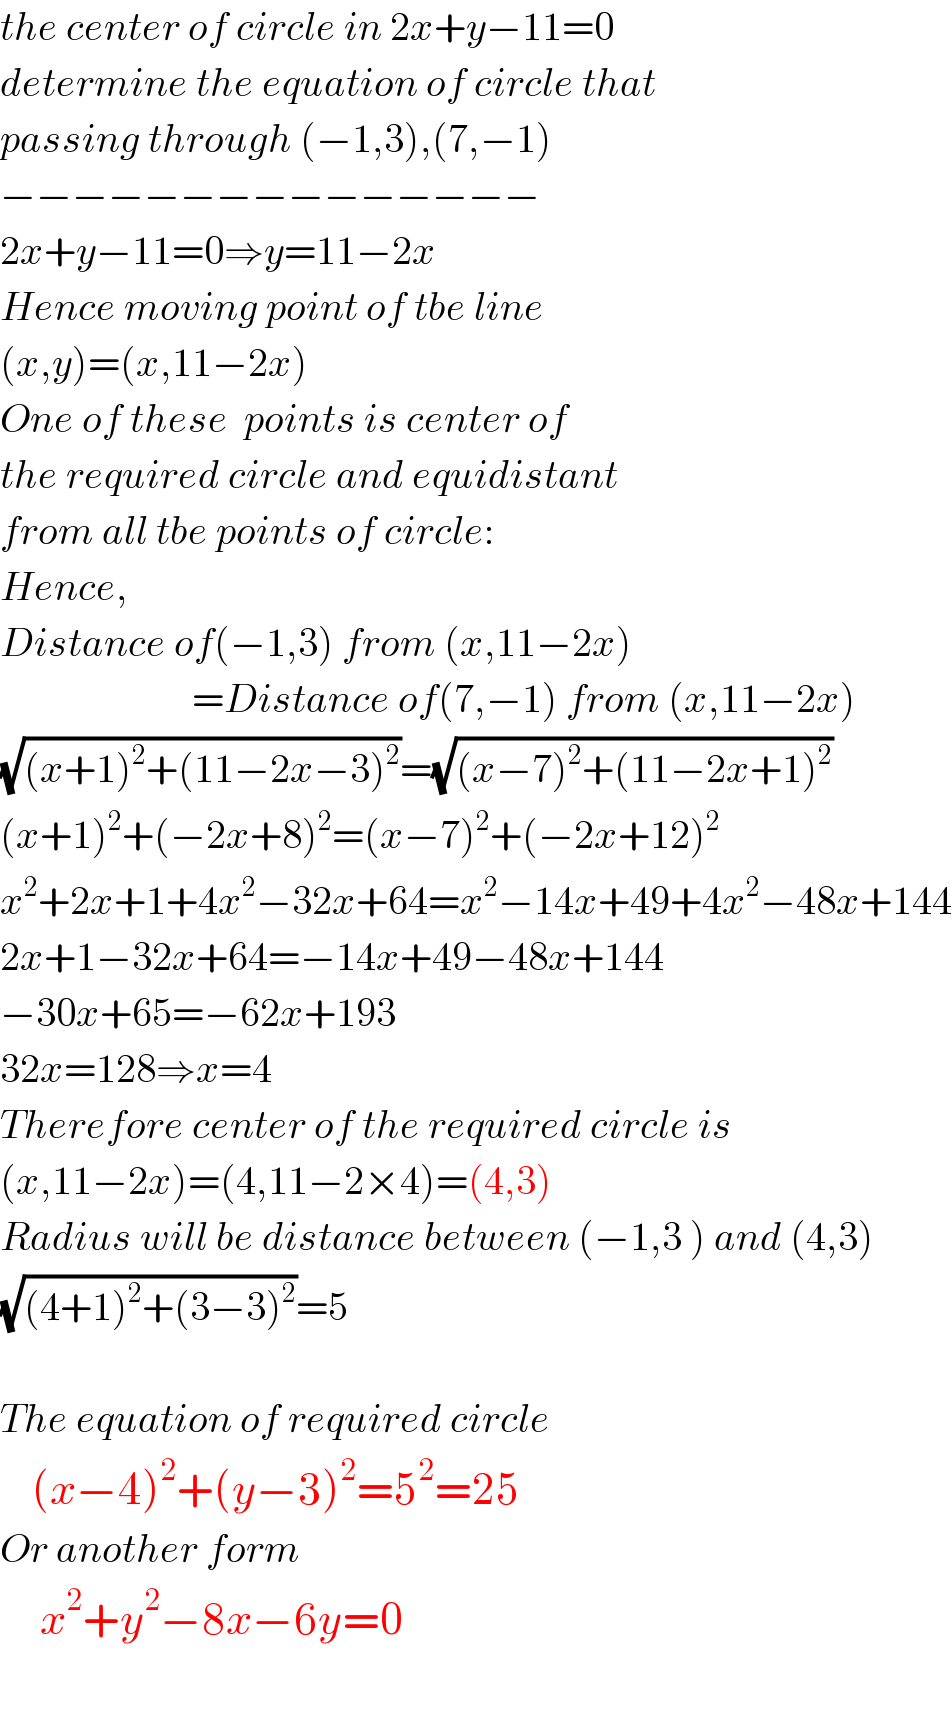 the center of circle in 2x+y−11=0  determine the equation of circle that  passing through (−1,3),(7,−1)  −−−−−−−−−−−−−−−  2x+y−11=0⇒y=11−2x  Hence moving point of tbe line  (x,y)=(x,11−2x)  One of these  points is center of  the required circle and equidistant  from all tbe points of circle:  Hence,  Distance of(−1,3) from (x,11−2x)                          =Distance of(7,−1) from (x,11−2x)  (√((x+1)^2 +(11−2x−3)^2 ))=(√((x−7)^2 +(11−2x+1)^2 ))  (x+1)^2 +(−2x+8)^2 =(x−7)^2 +(−2x+12)^2   x^2 +2x+1+4x^2 −32x+64=x^2 −14x+49+4x^2 −48x+144  2x+1−32x+64=−14x+49−48x+144  −30x+65=−62x+193  32x=128⇒x=4  Therefore center of the required circle is  (x,11−2x)=(4,11−2×4)=(4,3)  Radius will be distance between (−1,3 ) and (4,3)  (√((4+1)^2 +(3−3)^2 ))=5    The equation of required circle      (x−4)^2 +(y−3)^2 =5^2 =25  Or another form       x^2 +y^2 −8x−6y=0    